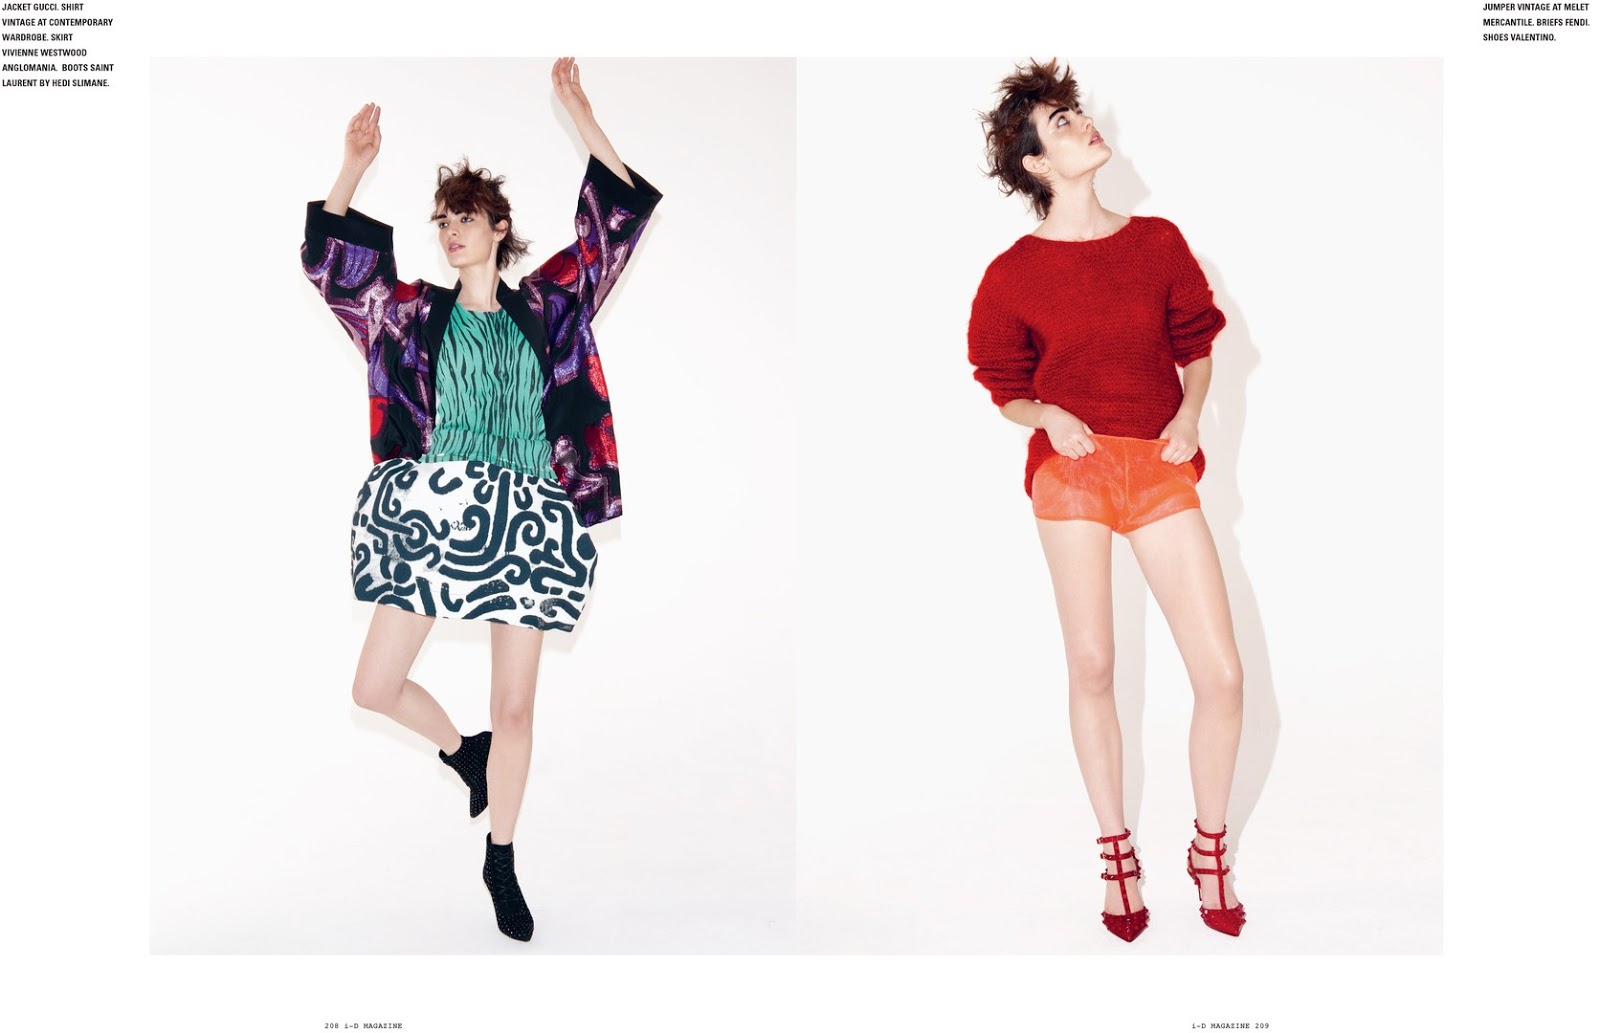 sam rollinson by walter pfeiffer for i-d pre-spring 2014 | visual ...